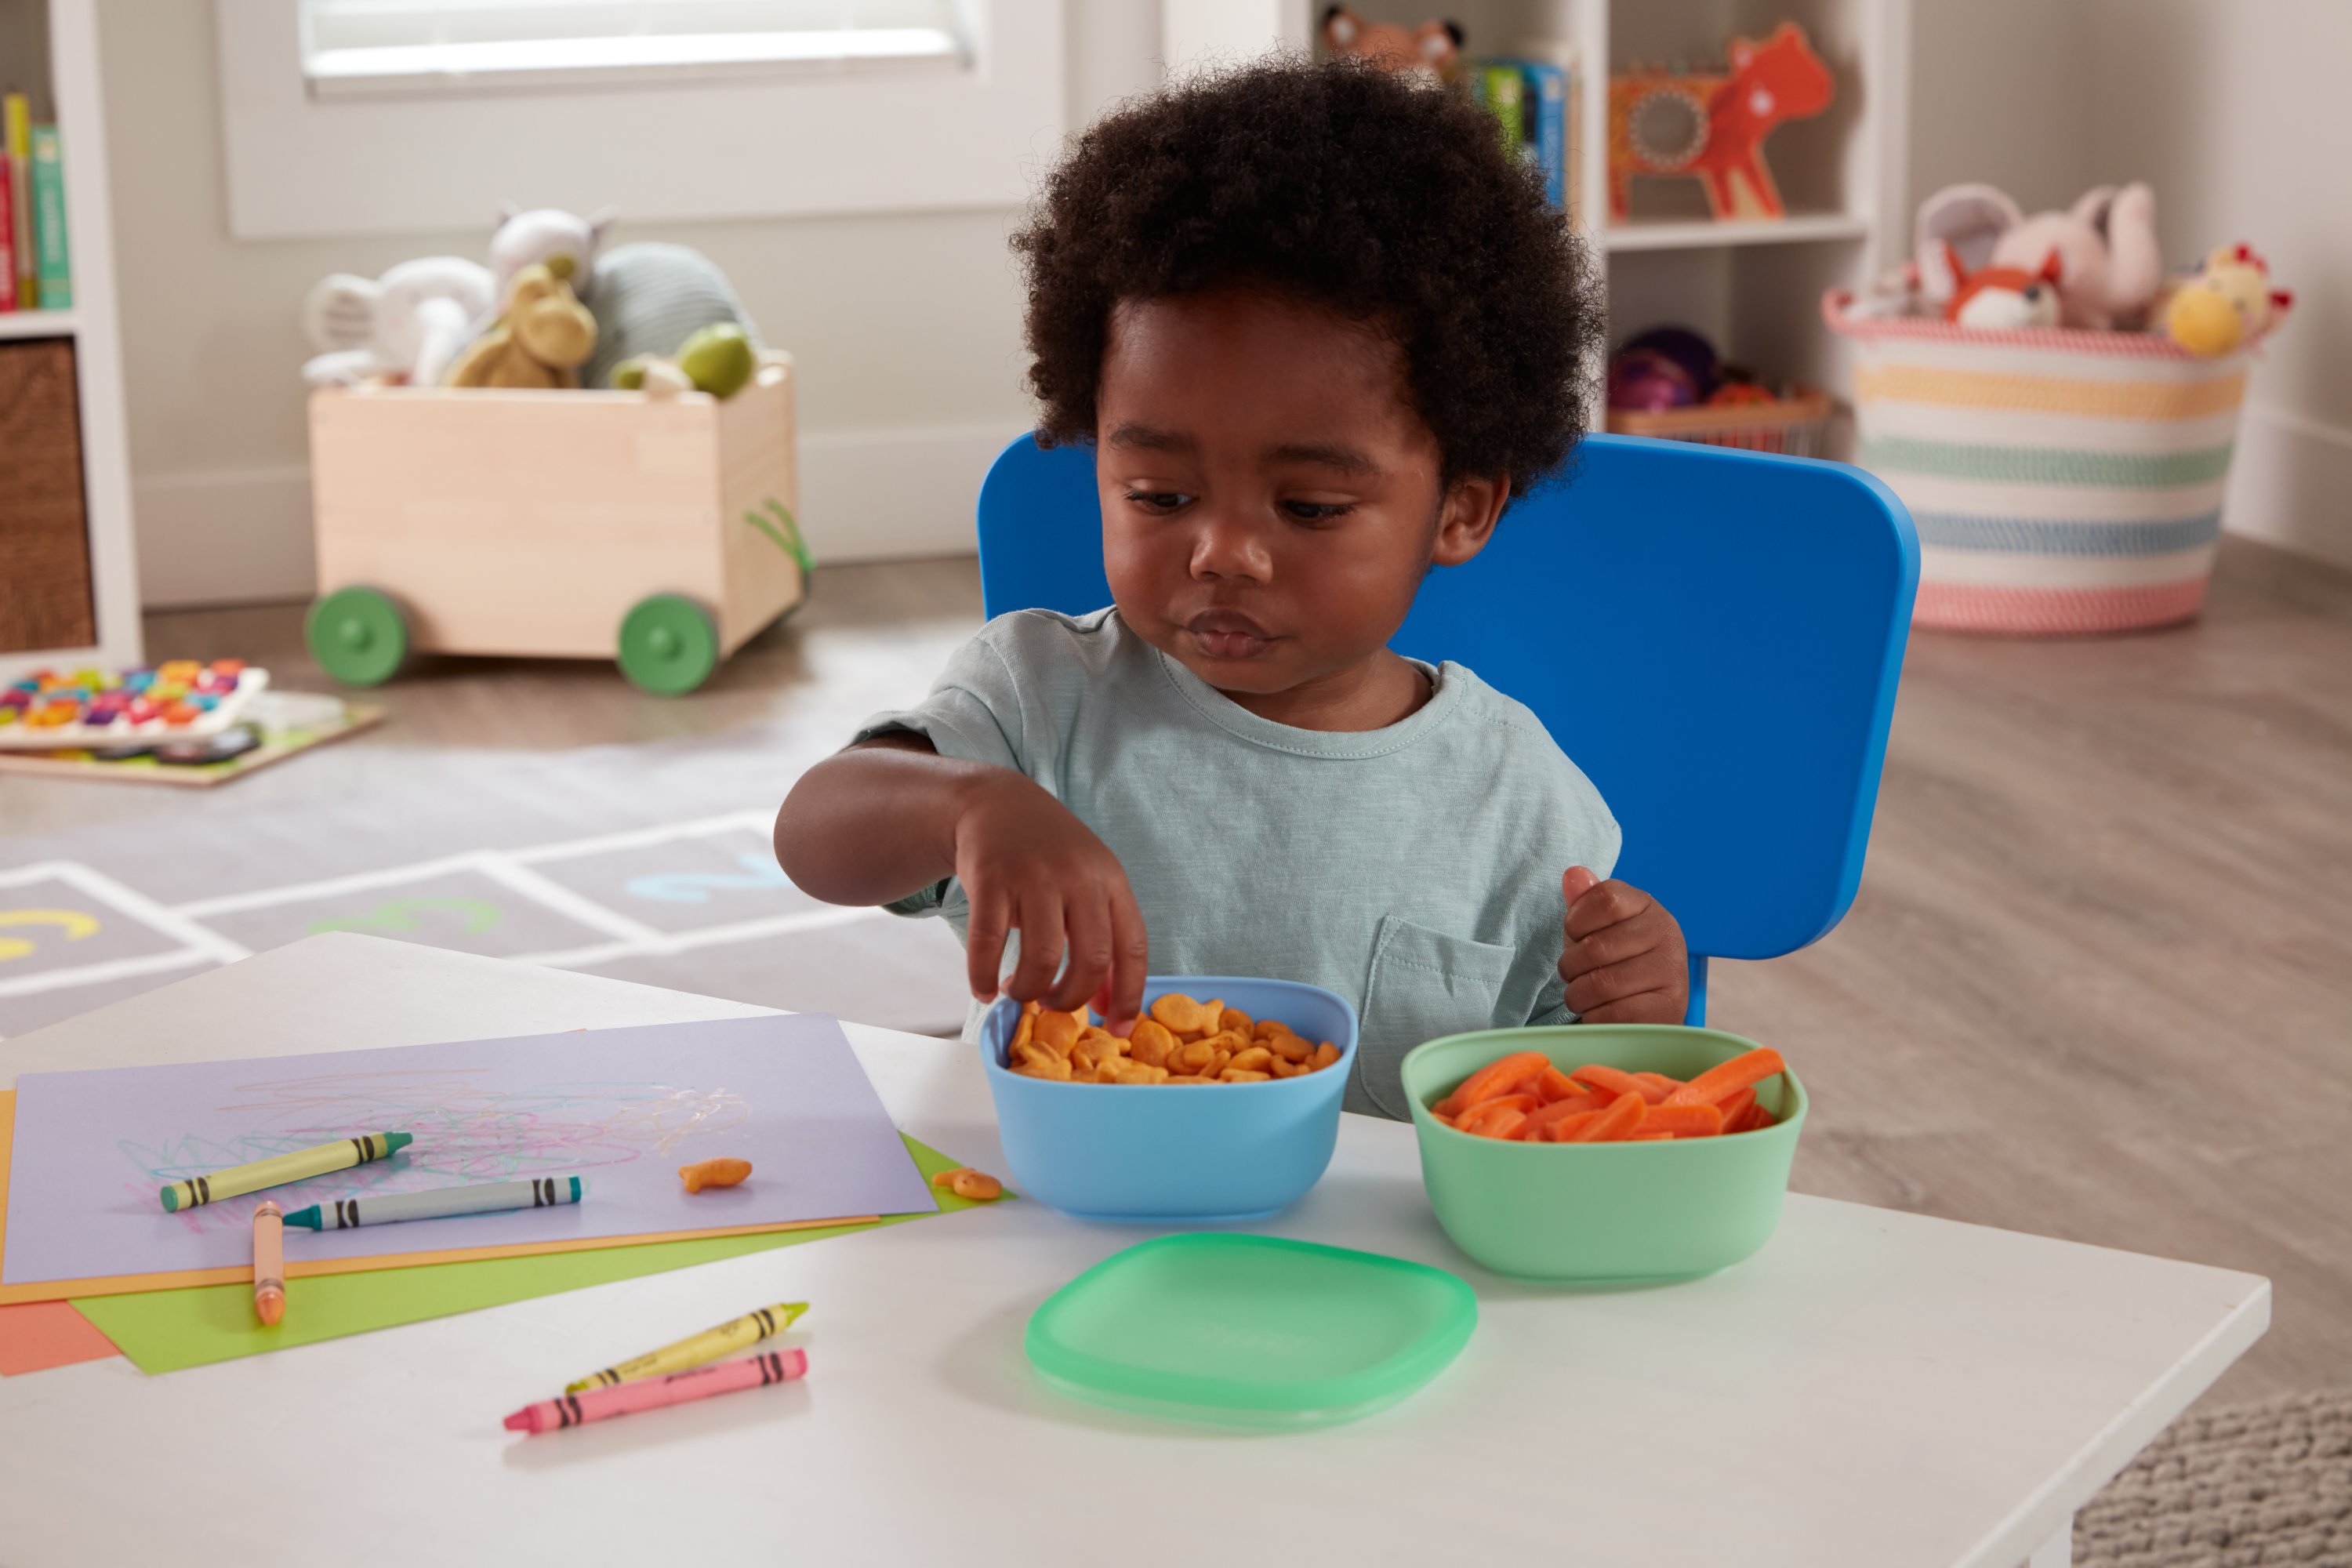 https://s7d9.scene7.com/is/image/NewellRubbermaid/NUK_Stacking_Bowl_Older%20Toddler_Snacking_Lifestyle_0031